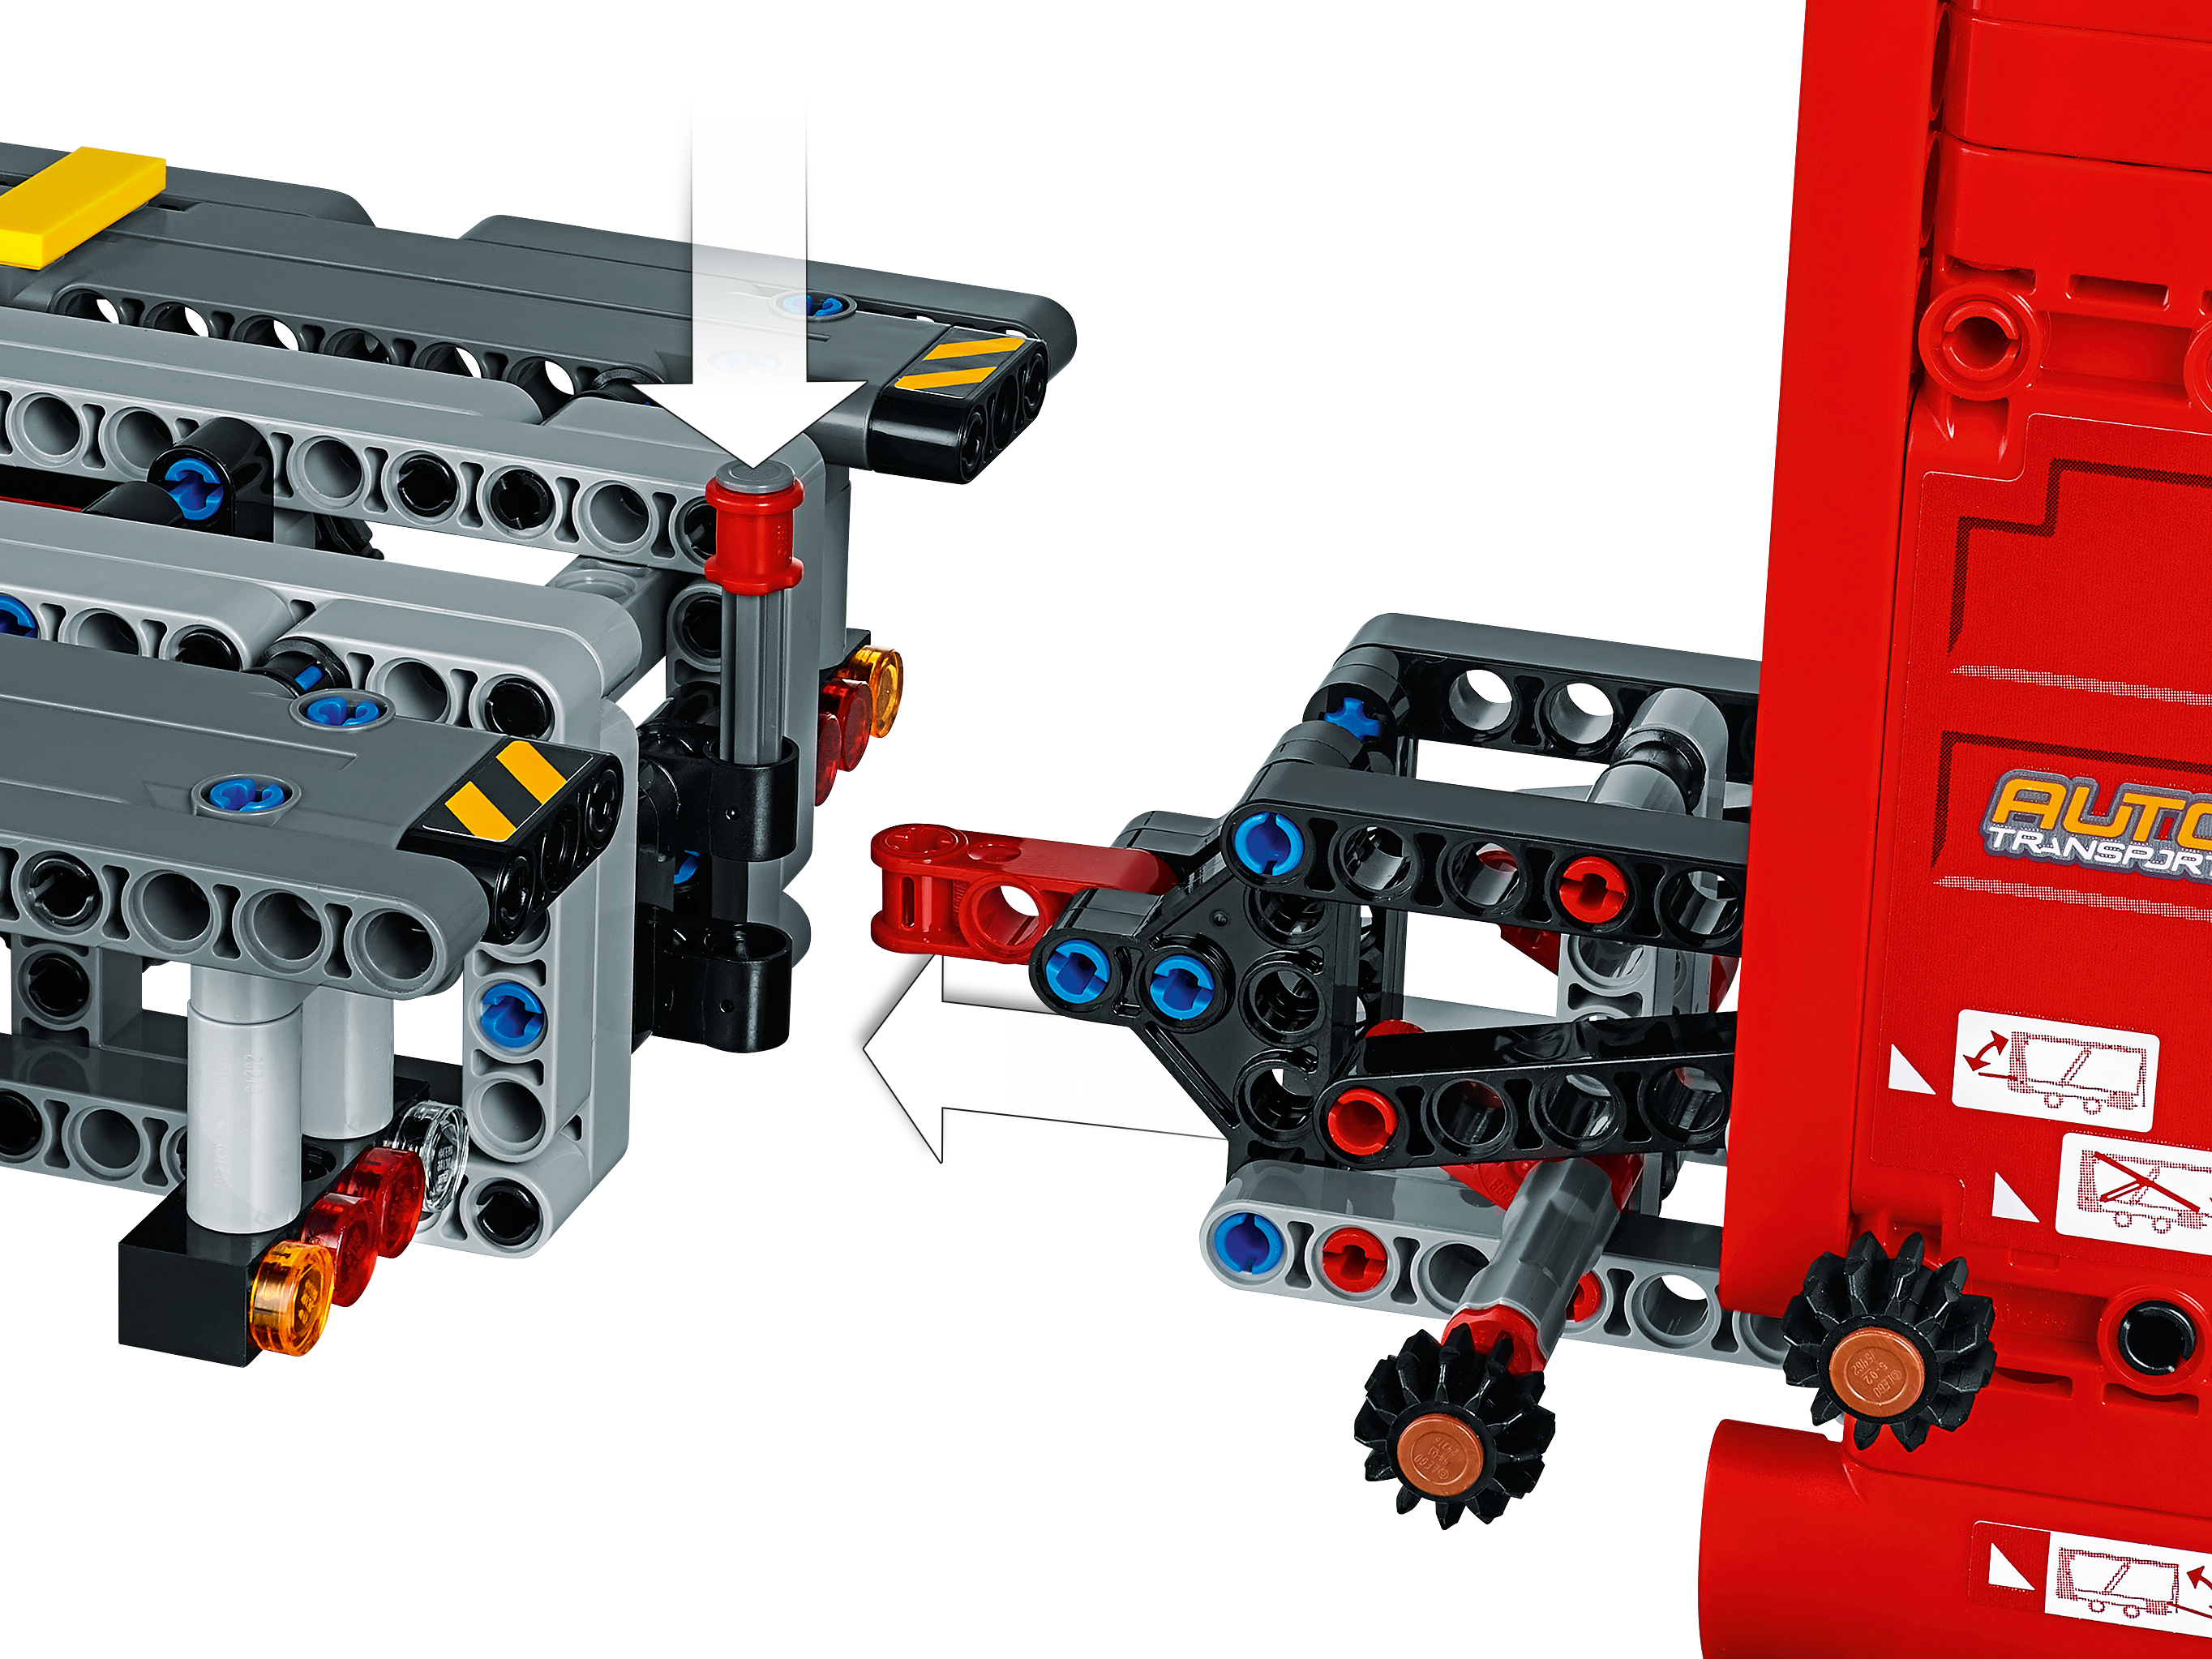 fuzzy imperium handle Car Transporter 42098 | Technic™ | Buy online at the Official LEGO® Shop US